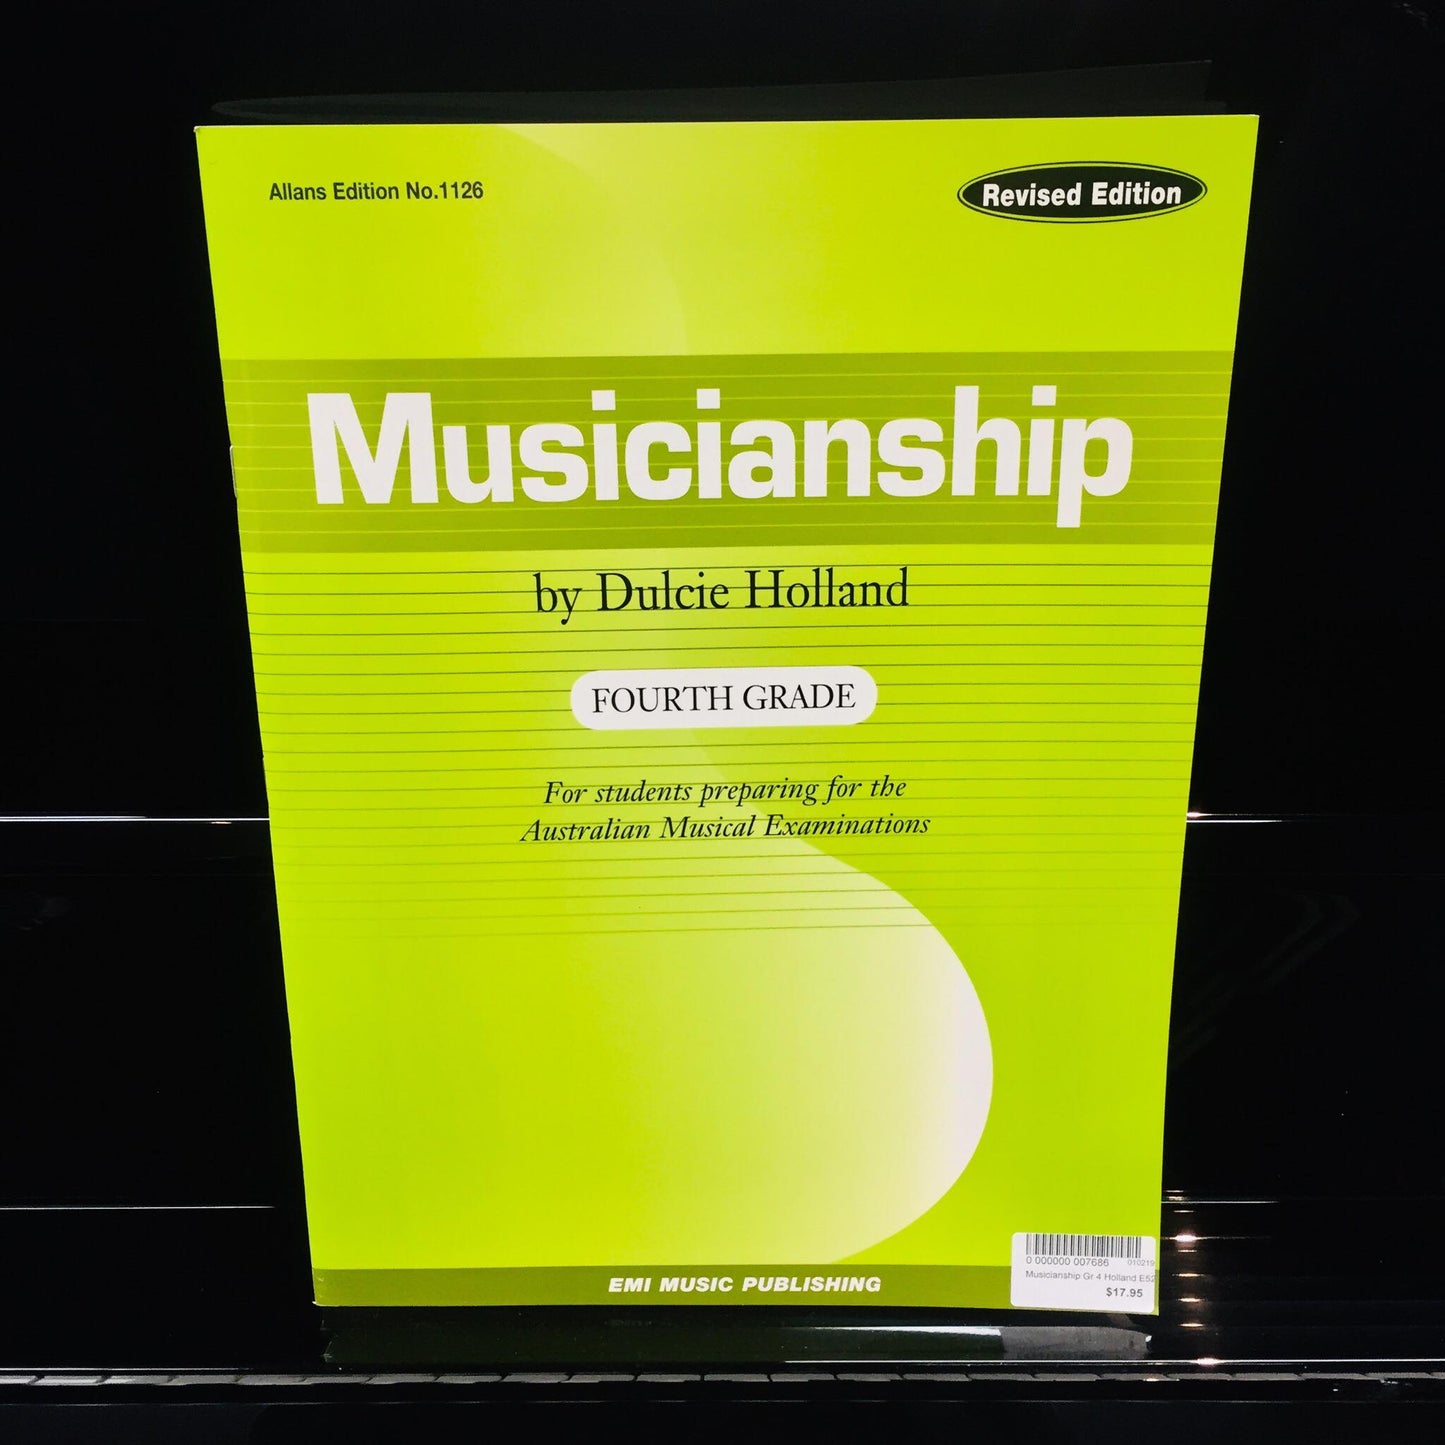 Musicianship (Revised Edition) by Dulcie Holland